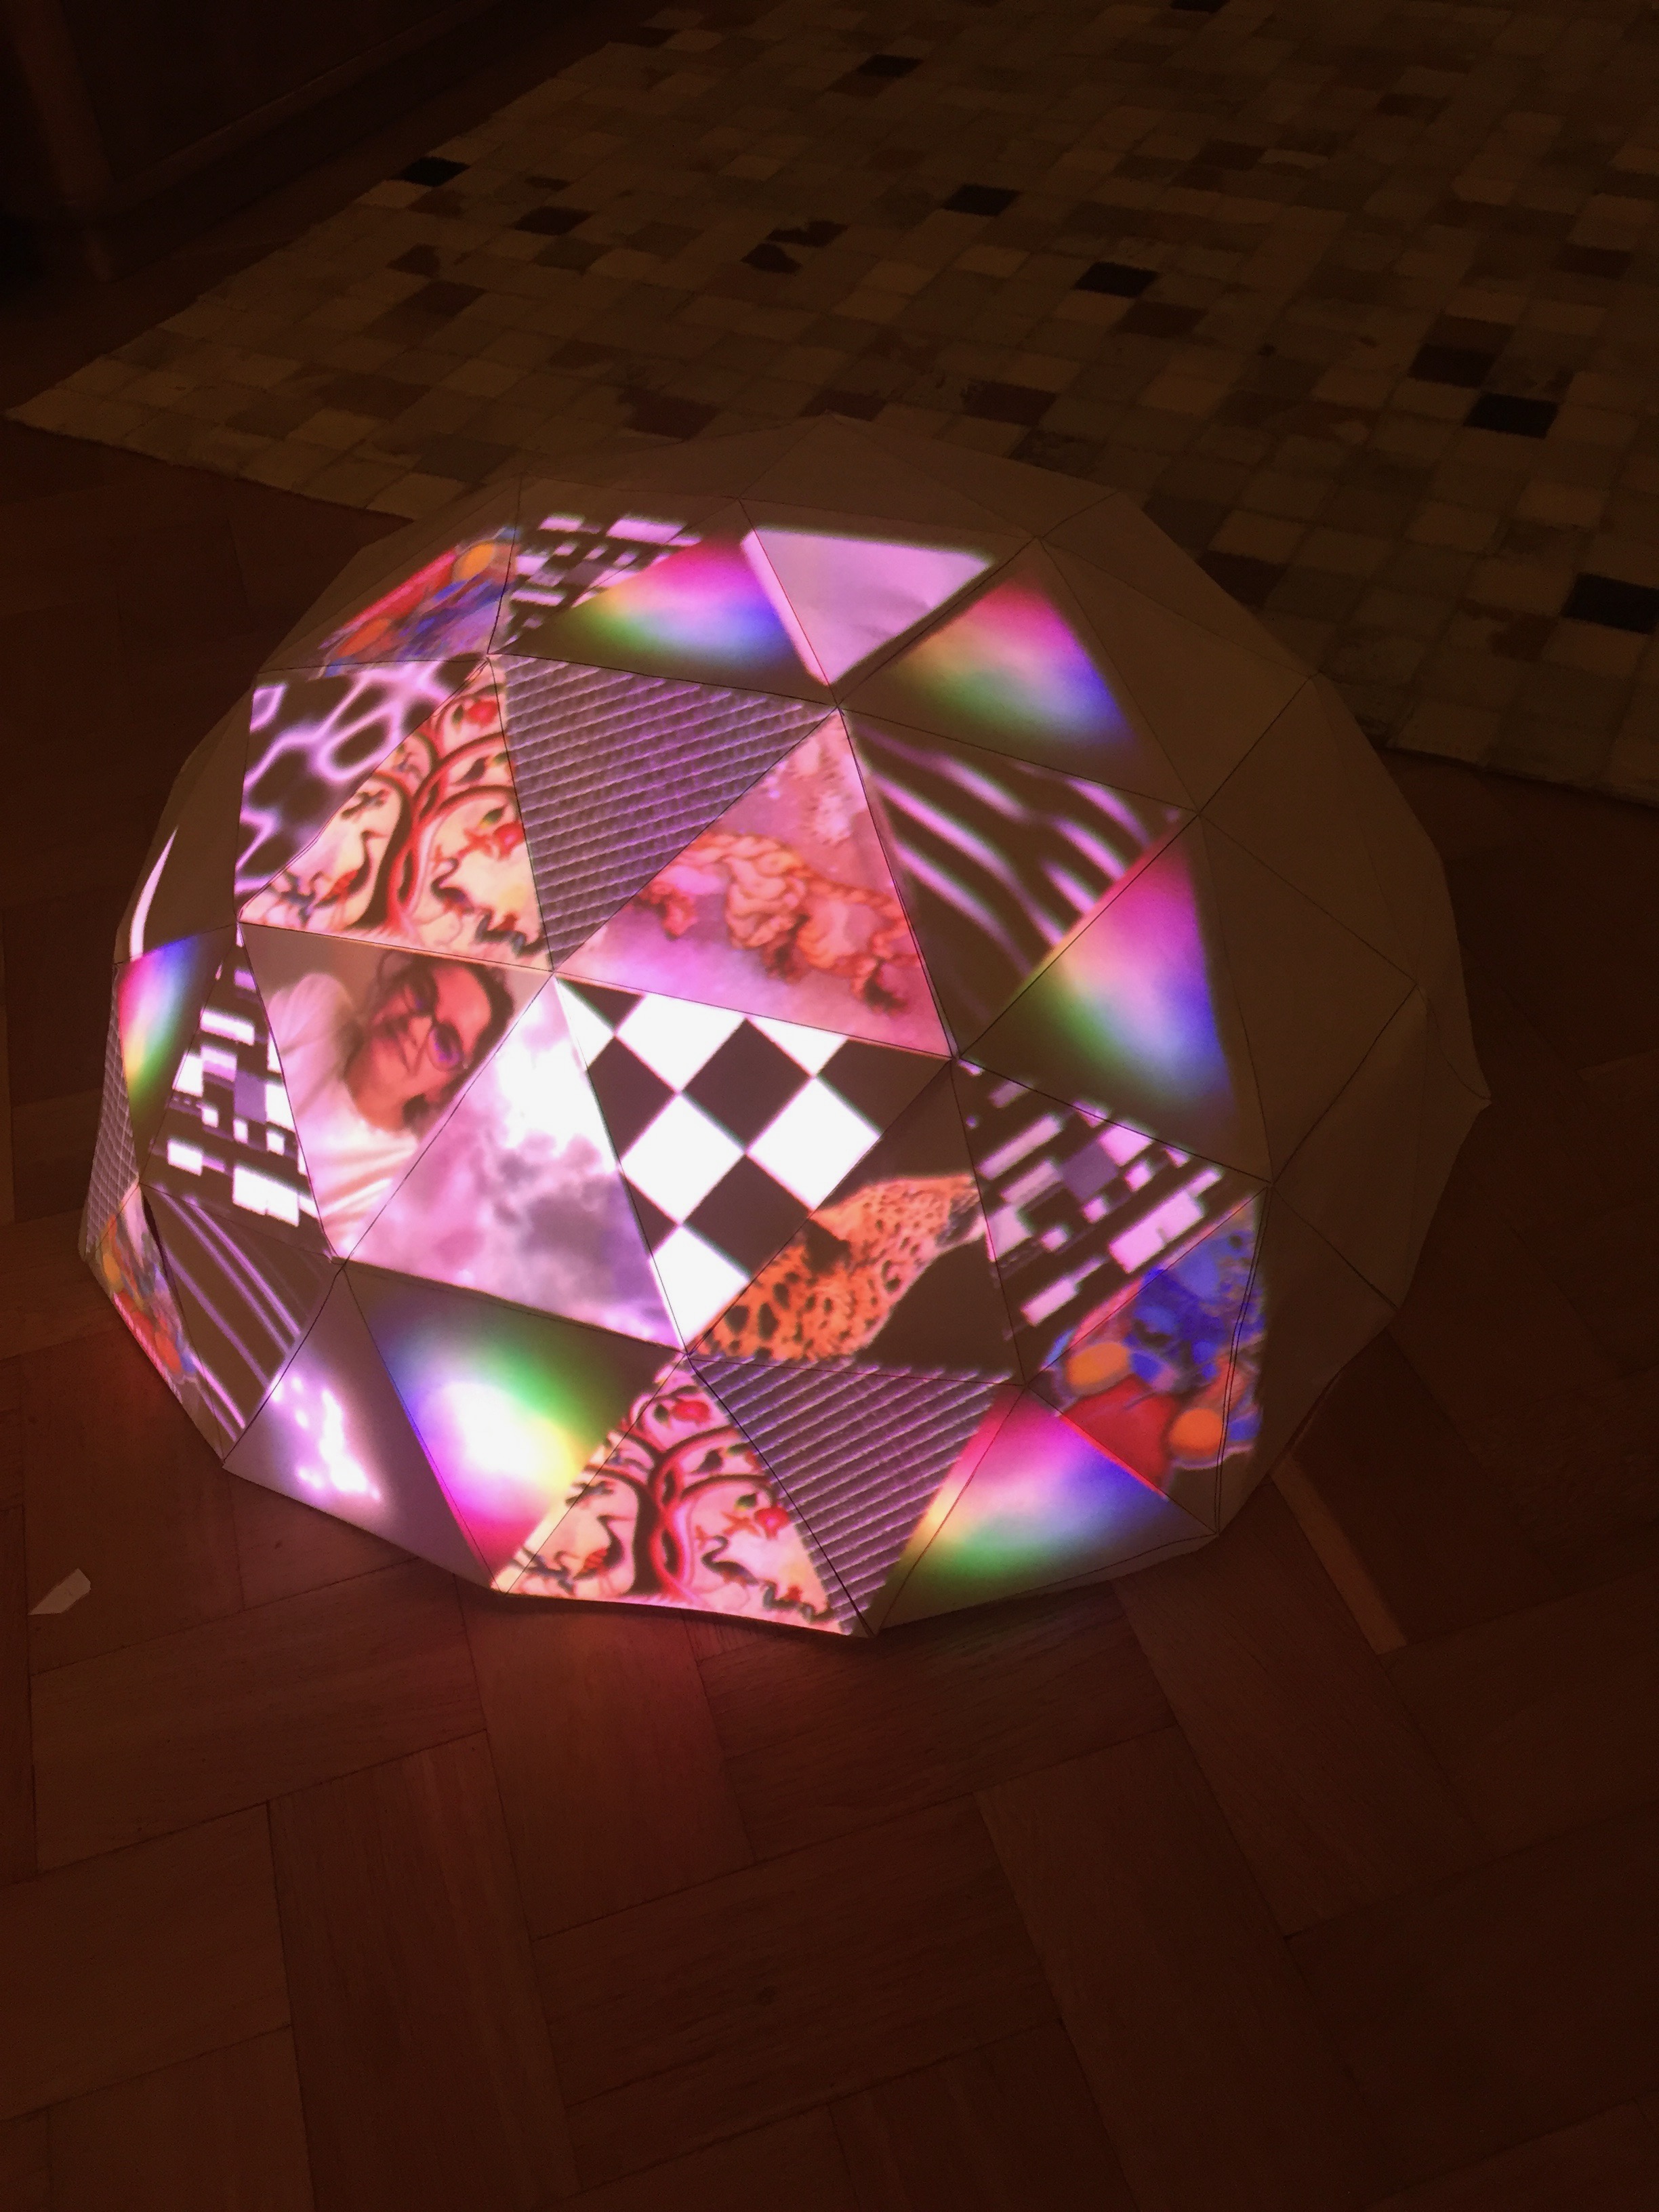 A geodesic dome in paper, with various pictures mapped and projected on its faces.